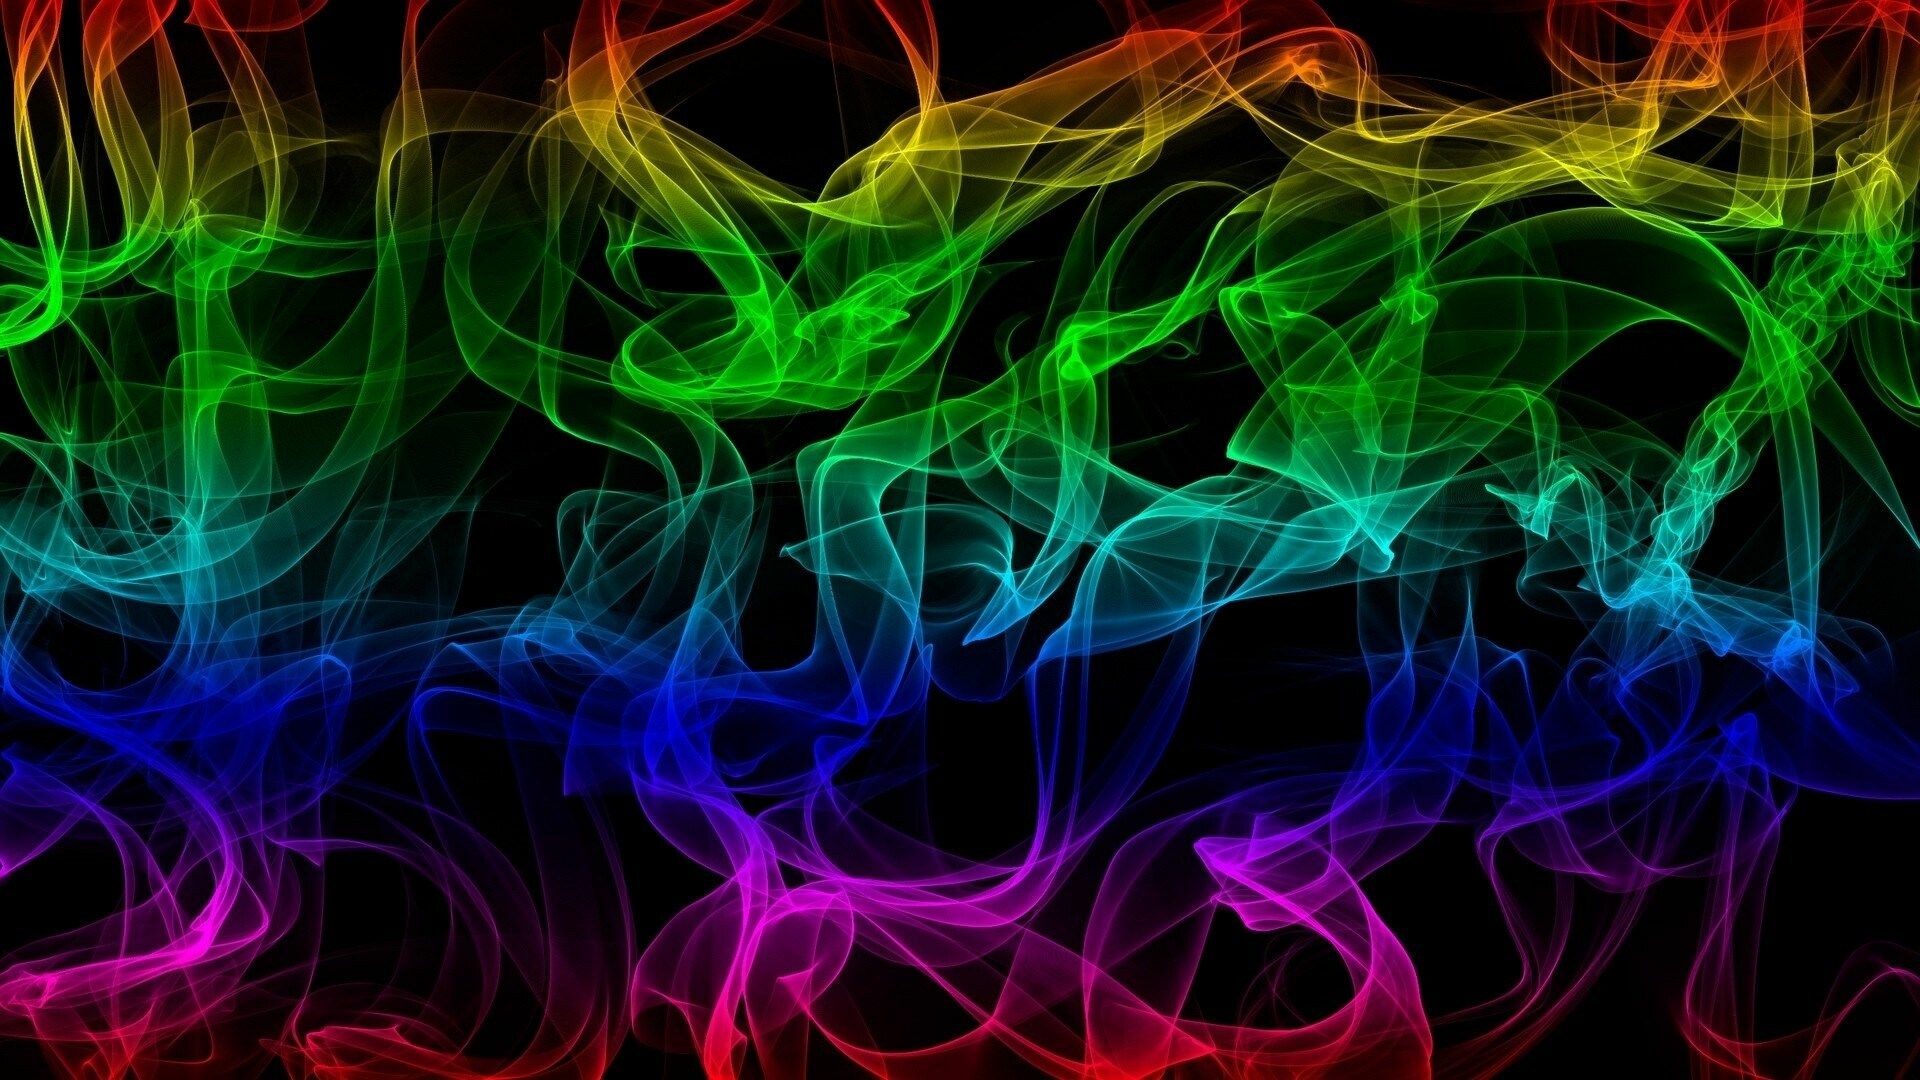 Rainbow Colors: Multitone digital pattern, An abstract art. 1920x1080 Full HD Background.